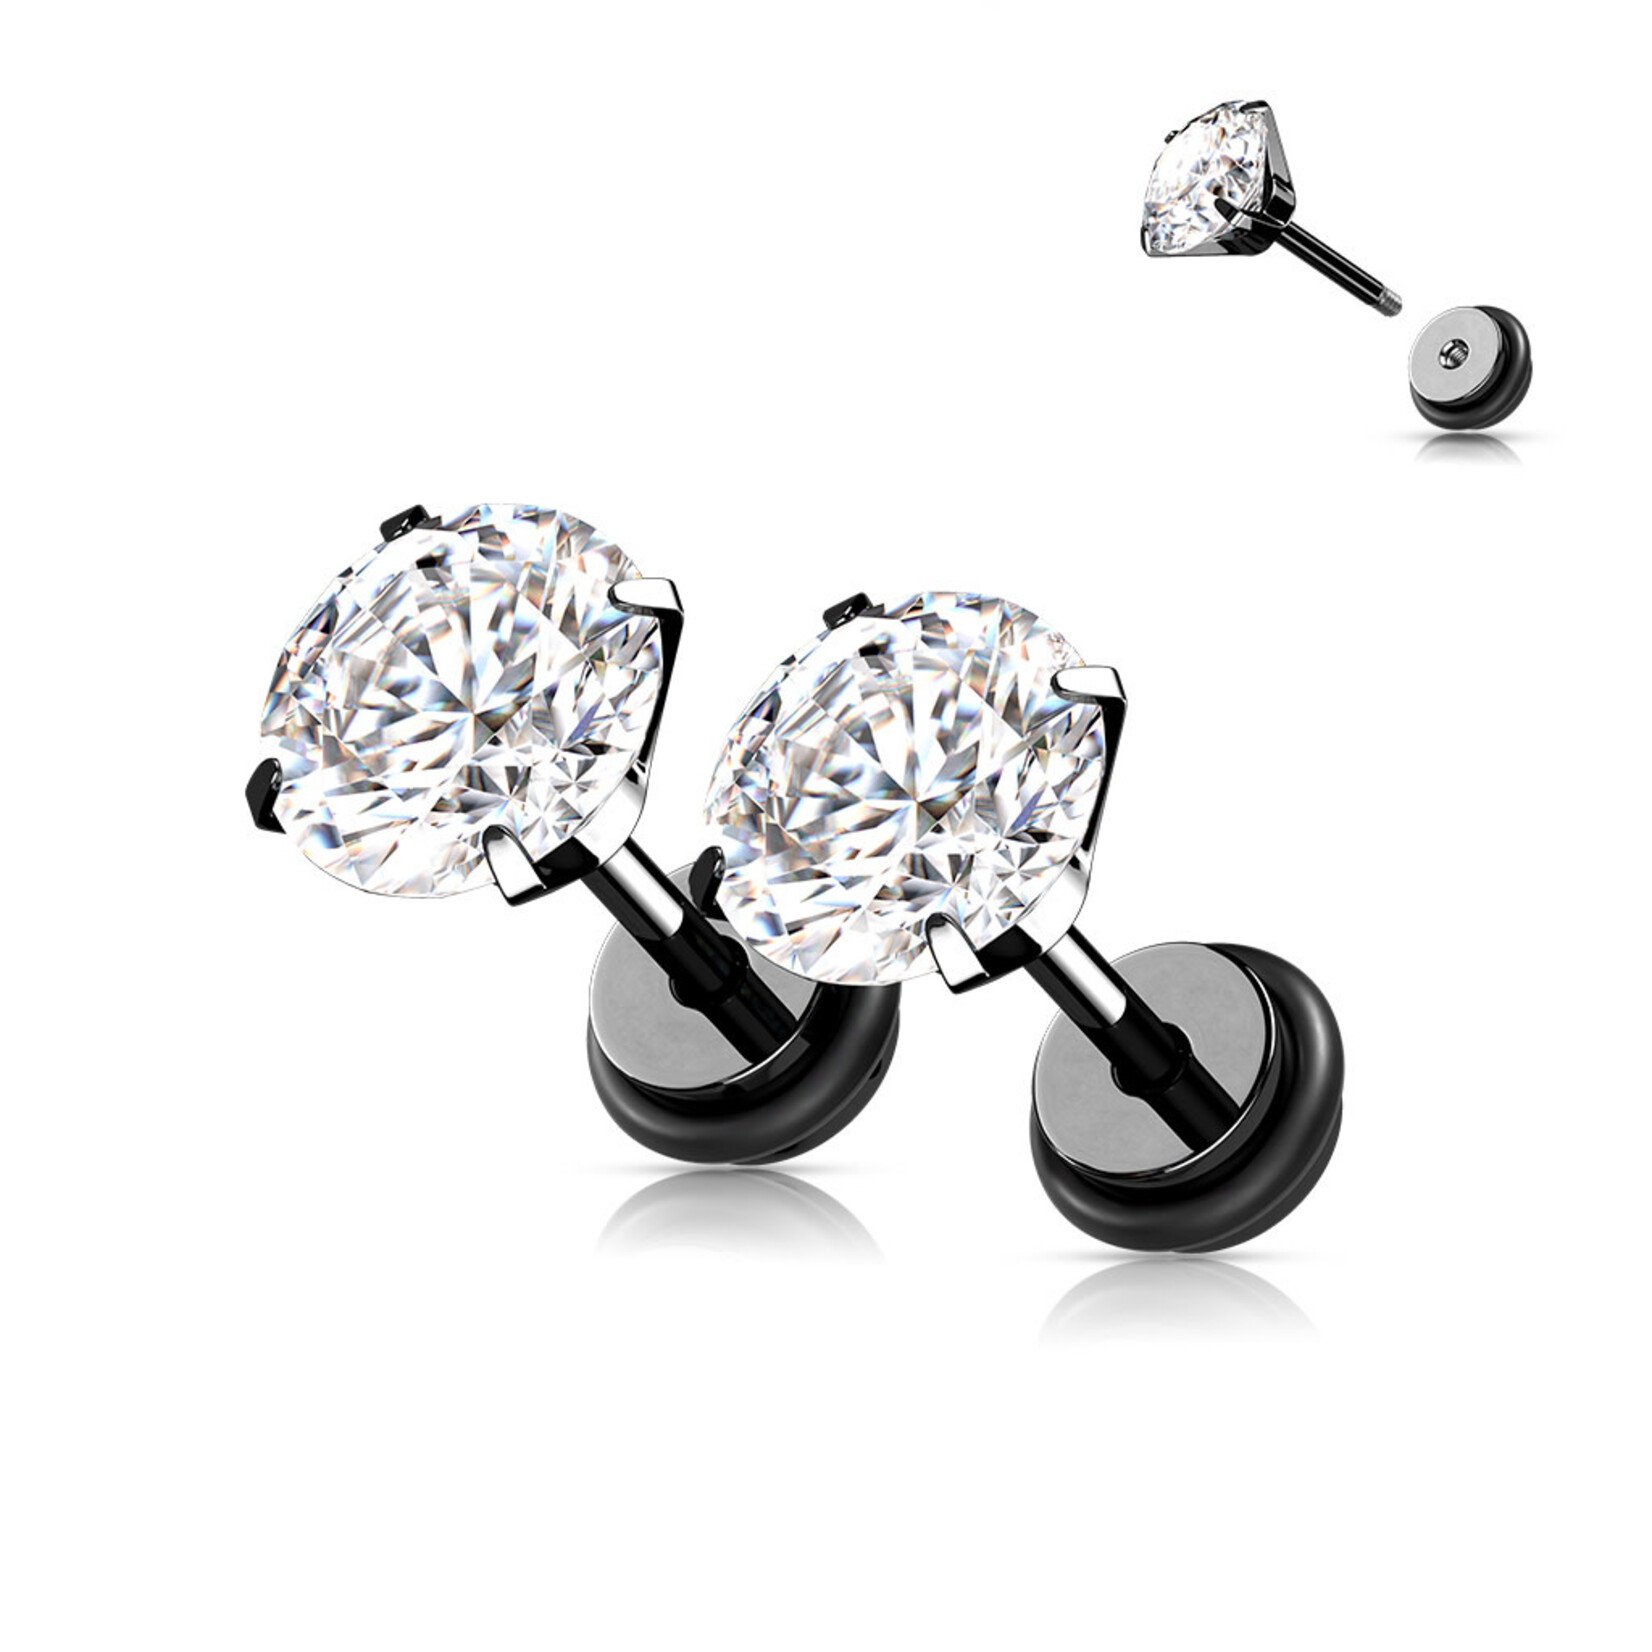 Hollywood Body Jewelry Crystal 16G Faux Plugs